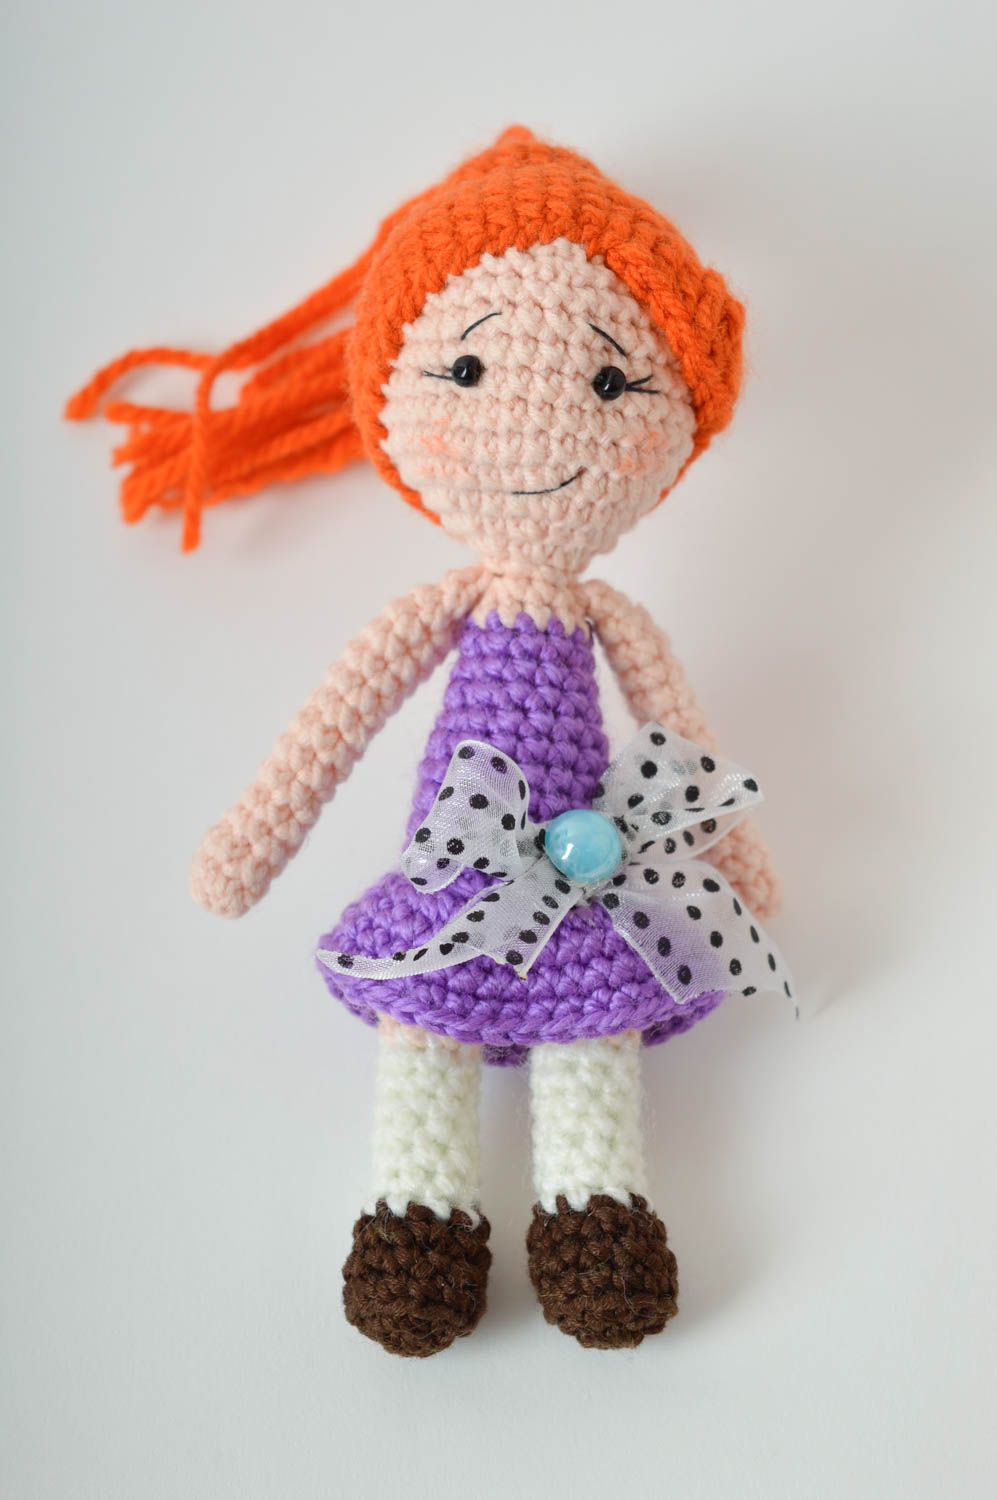 Baby doll handmade crocheted toy for children stuffed toys hand-crocheted toys photo 2